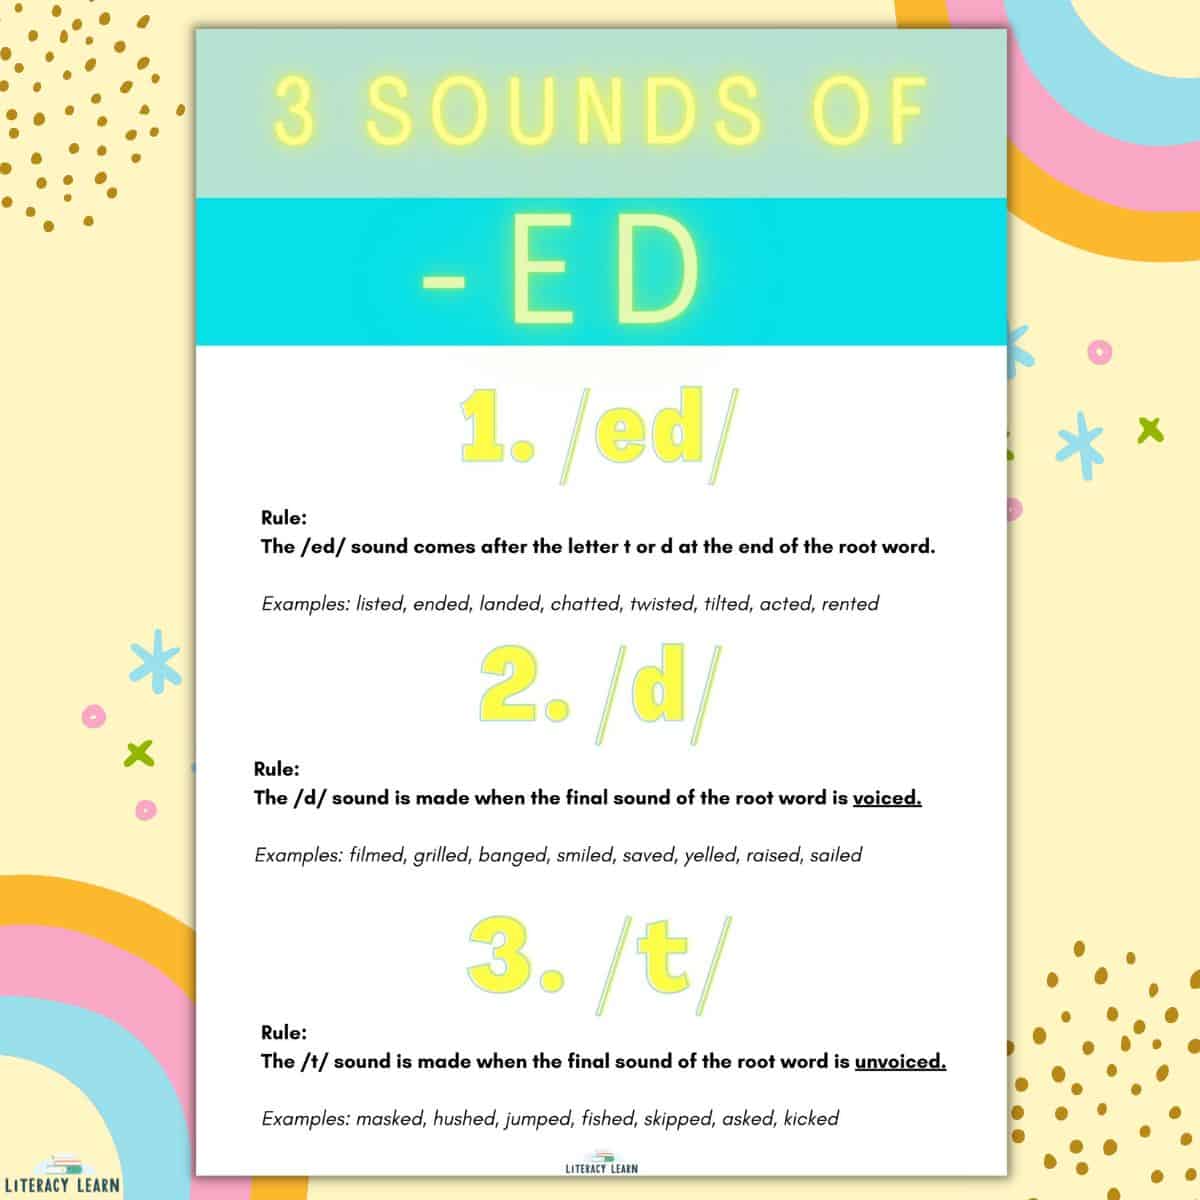 Graphic with stars and rainbows with large poster showing 3 sounds of suffix - ed with rules and examples. 